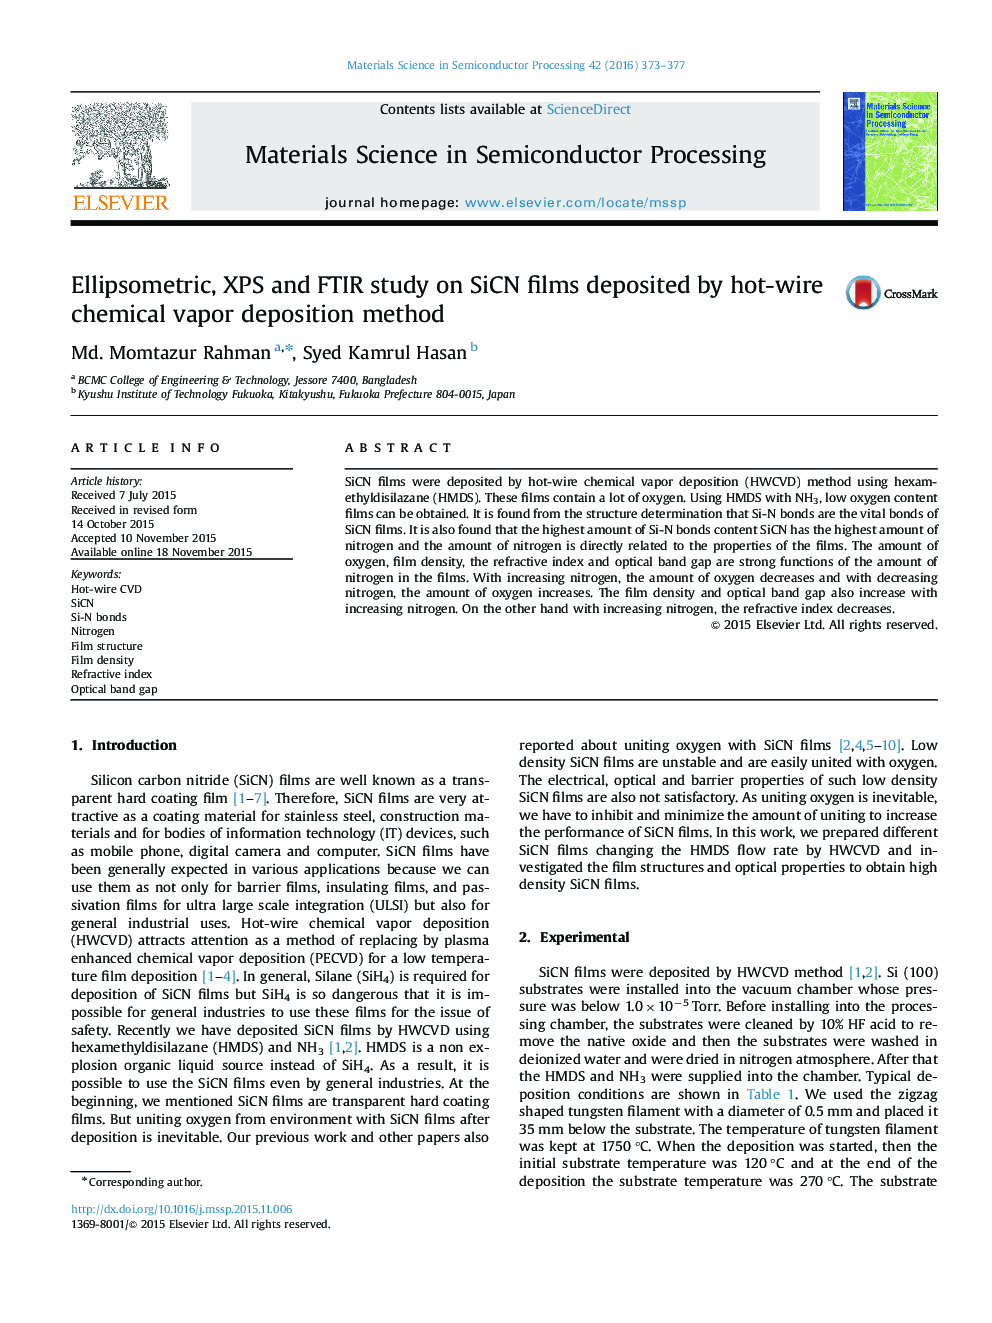 Ellipsometric, XPS and FTIR study on SiCN films deposited by hot-wire chemical vapor deposition method